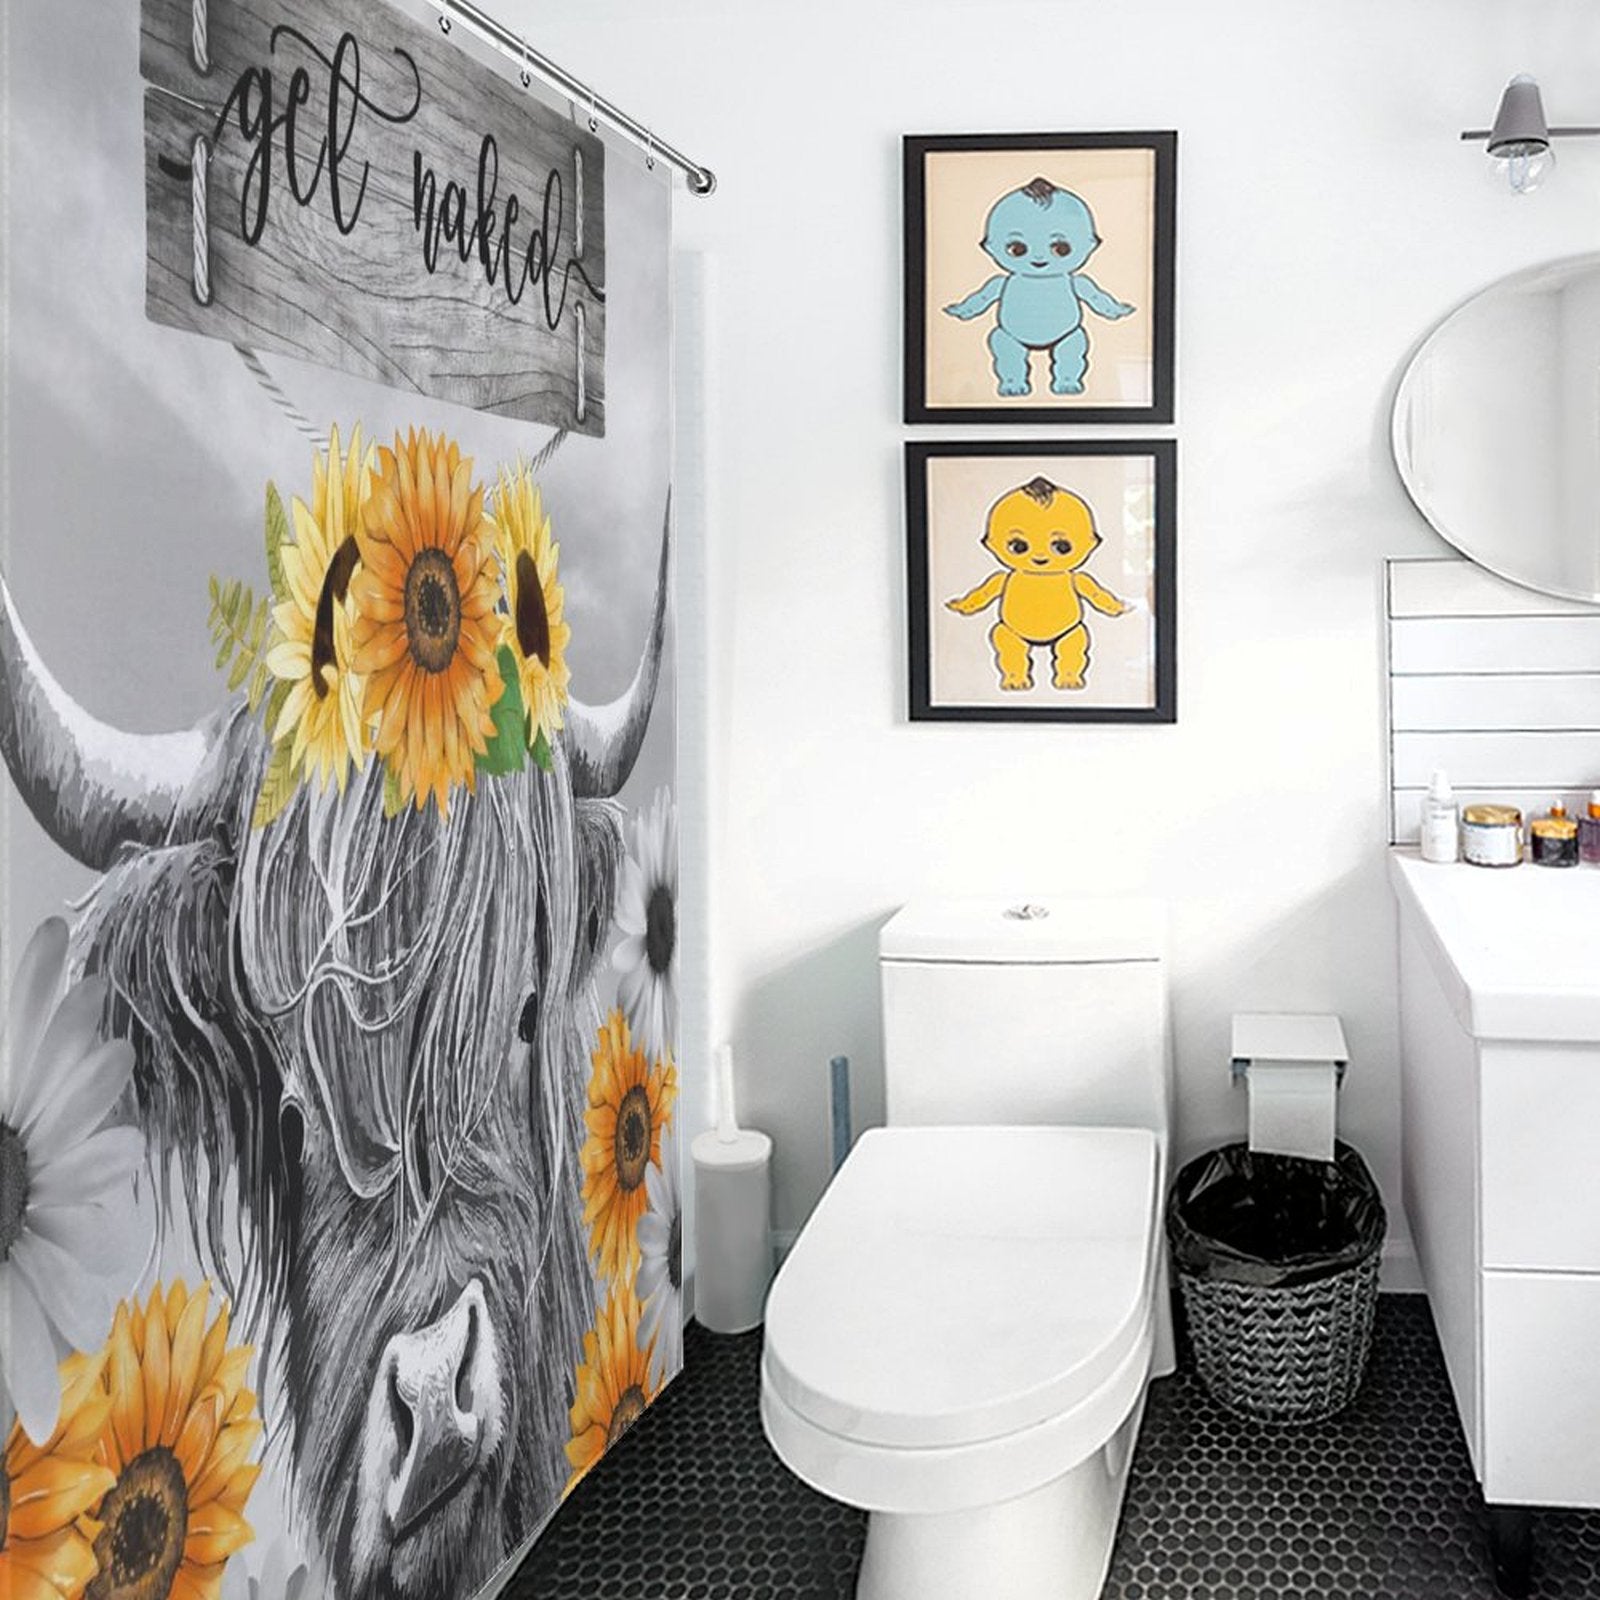 Bathroom with a toilet, sink, and a Highland Cow Black and White Funny Letters Sunflower Get Naked Shower Curtain-Cottoncat by Cotton Cat. There are two framed posters of cartoonish animals on the wall above the toilet, adding to the whimsical bathroom decor.